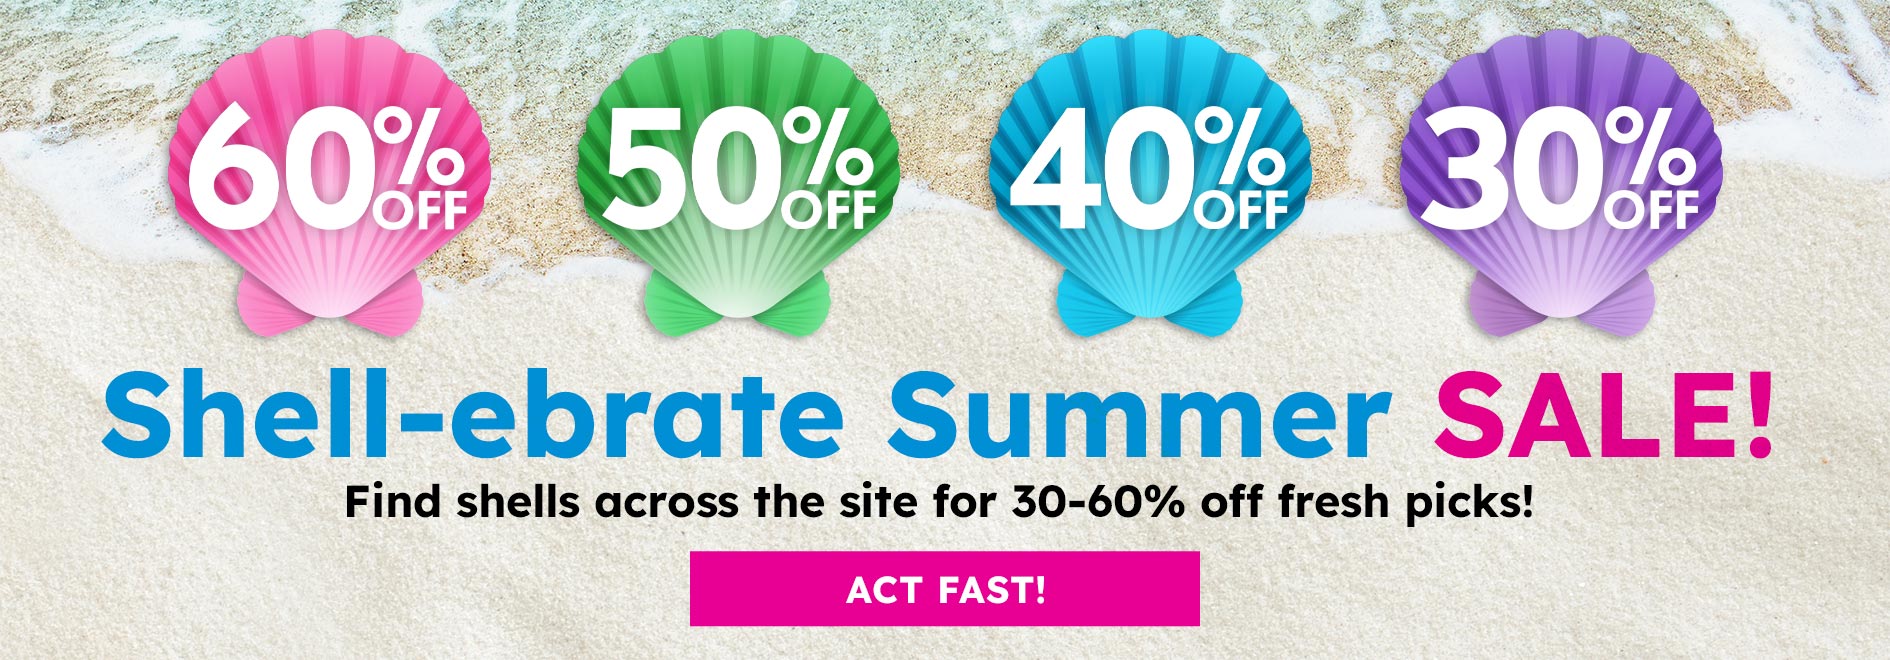 Shell-ebrate Sumer sale! find shells across the site for 30-60% off fresh picks! Start Collecting!